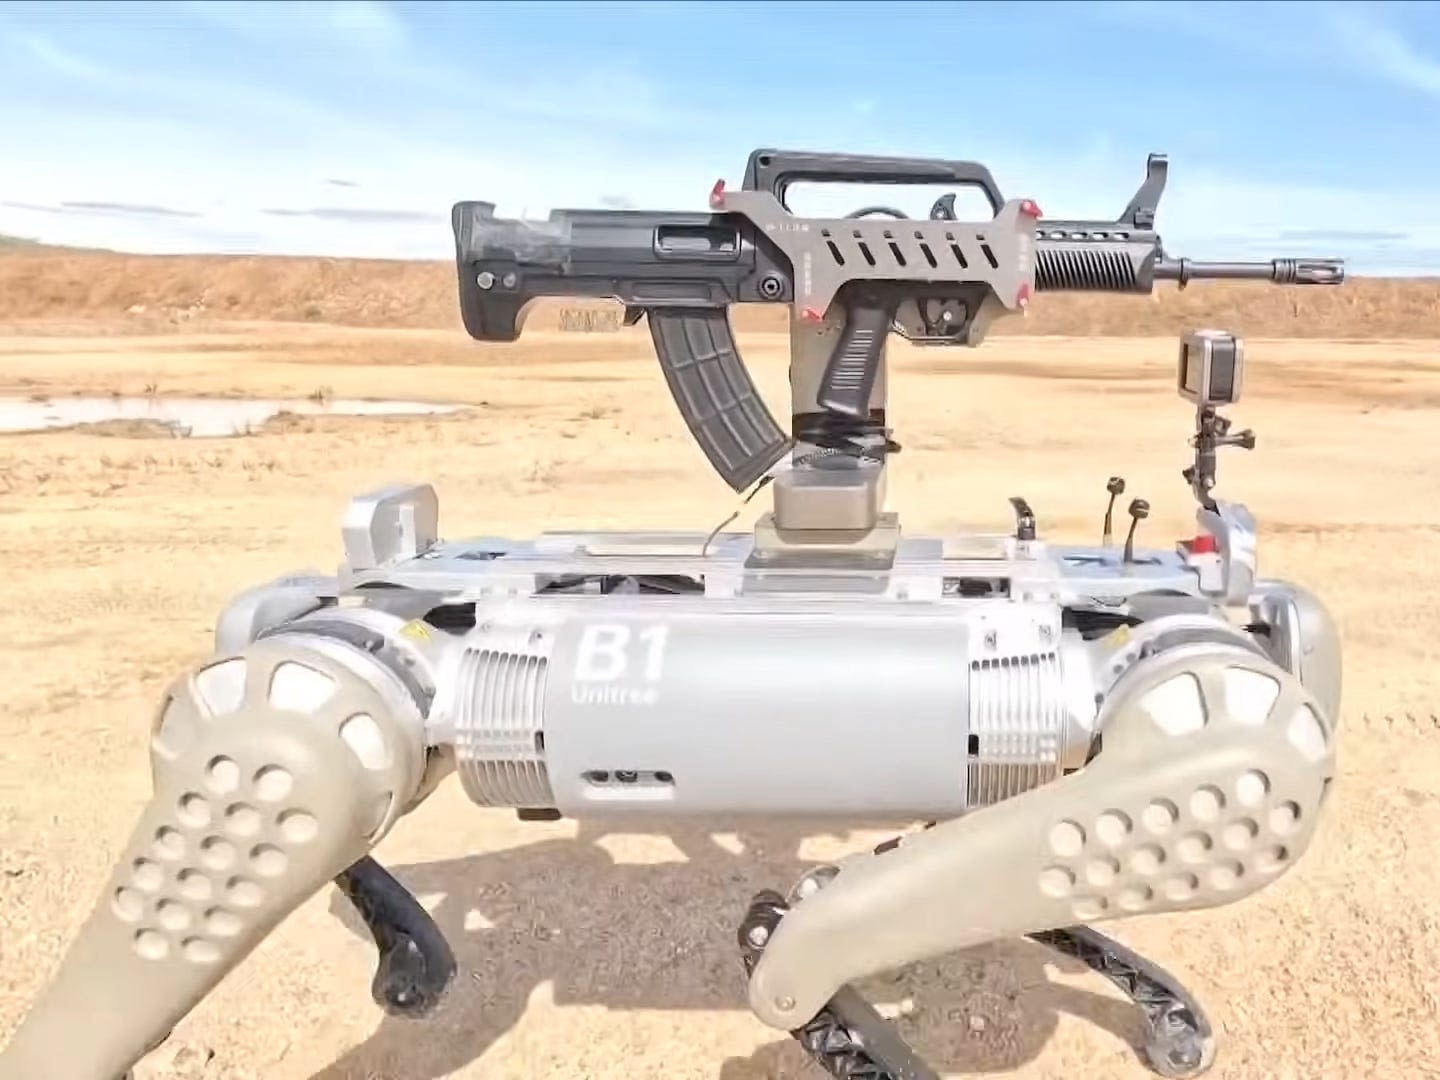 China's latest weapon of war is a gun-toting robot dog